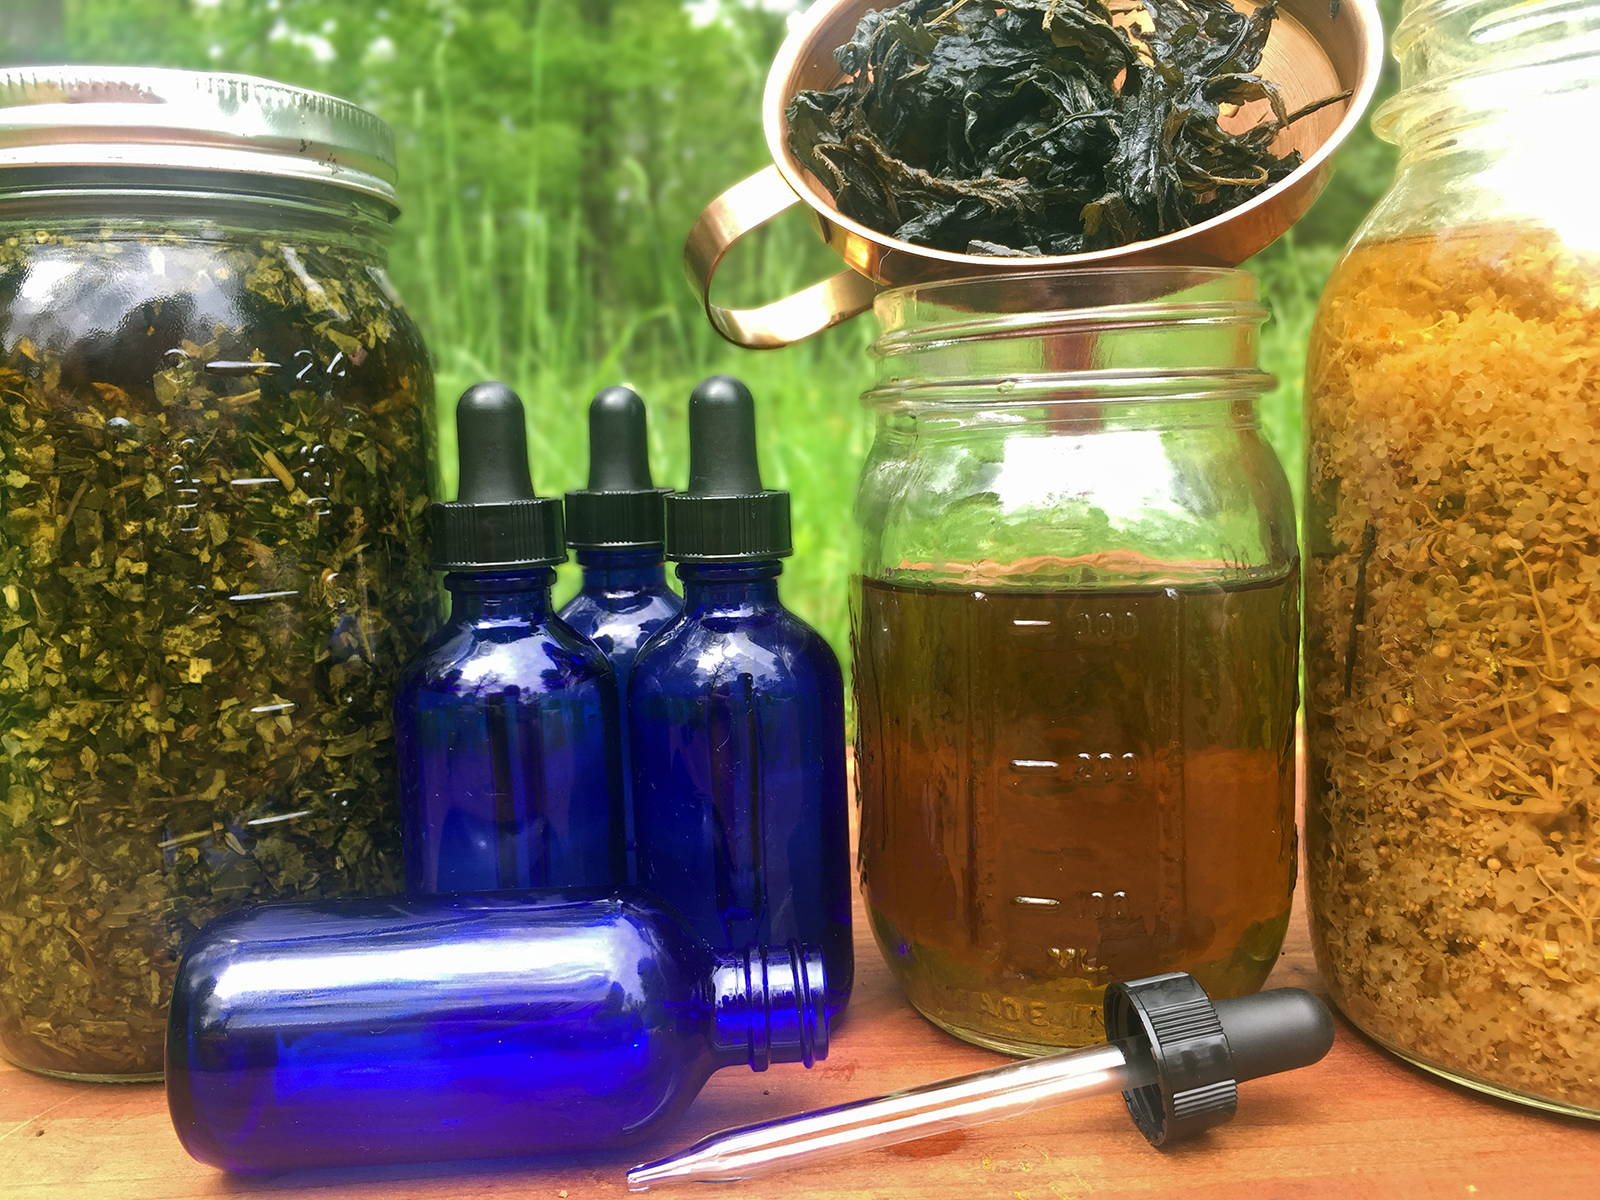 jars of tinctures and herbs